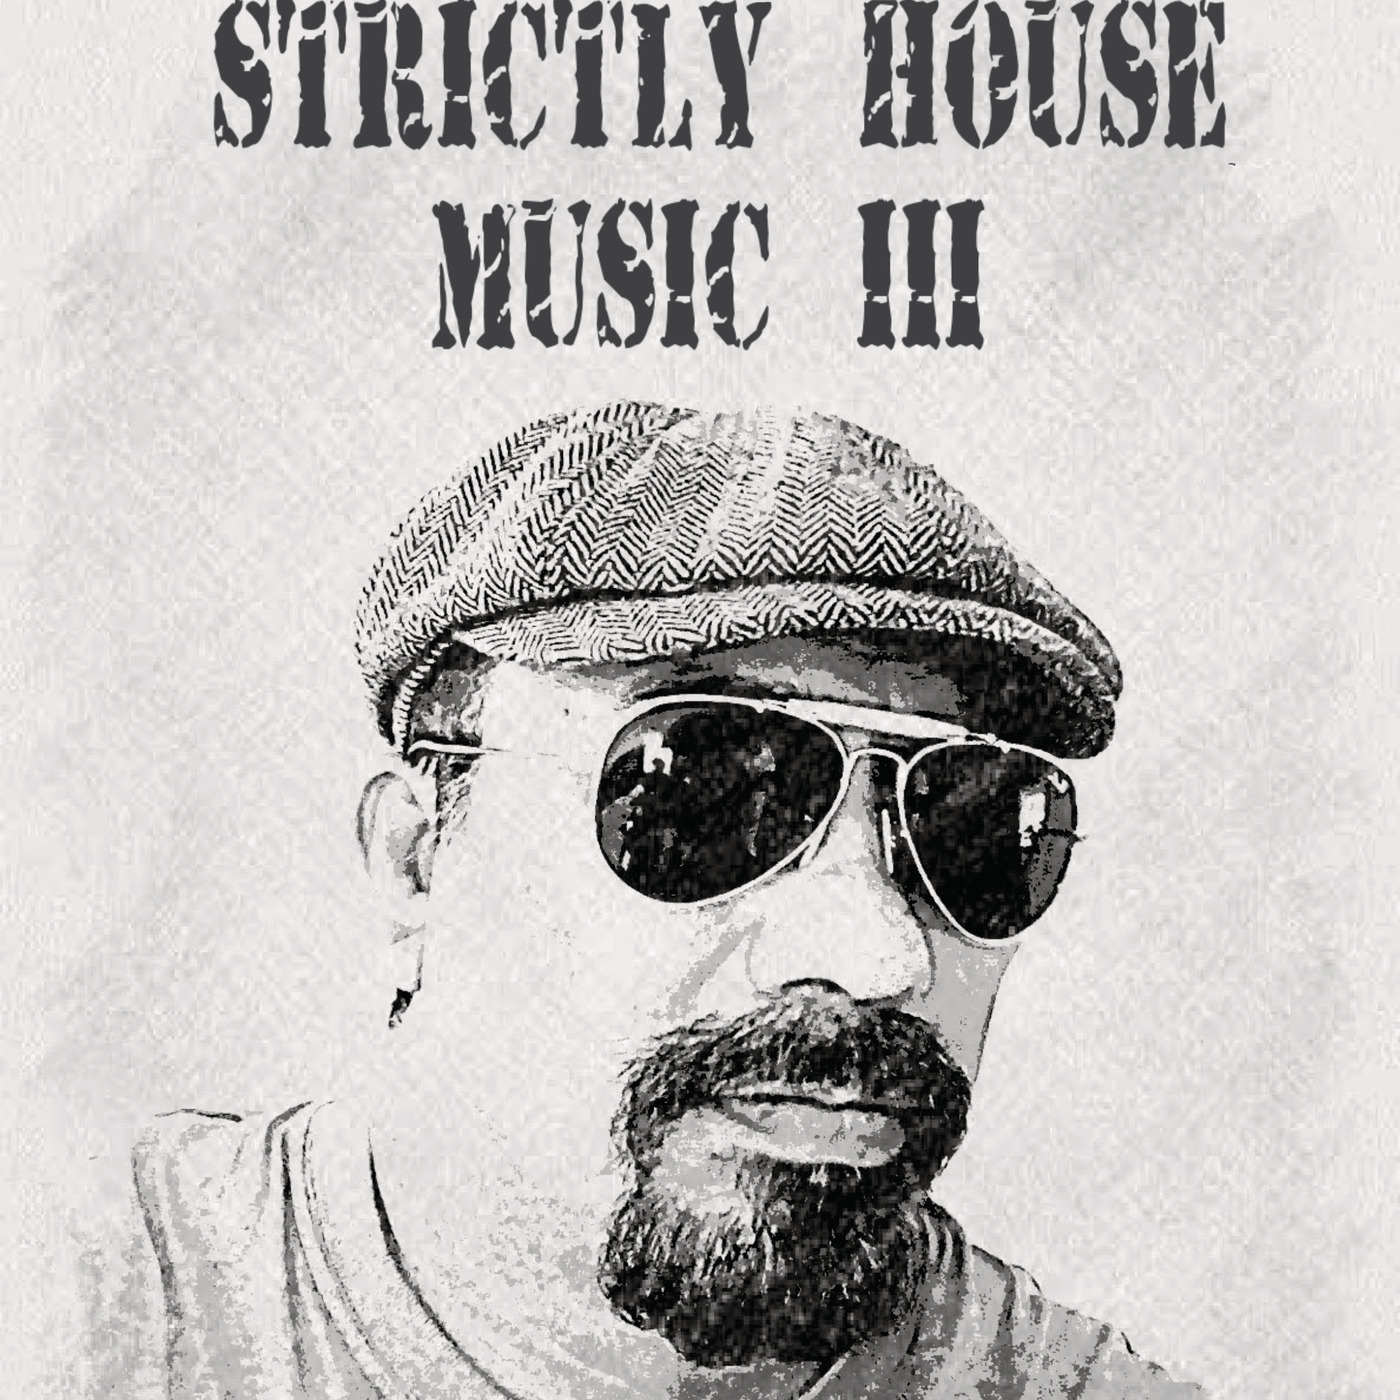 Strictly House Music III - Mix By Felipe Hoil